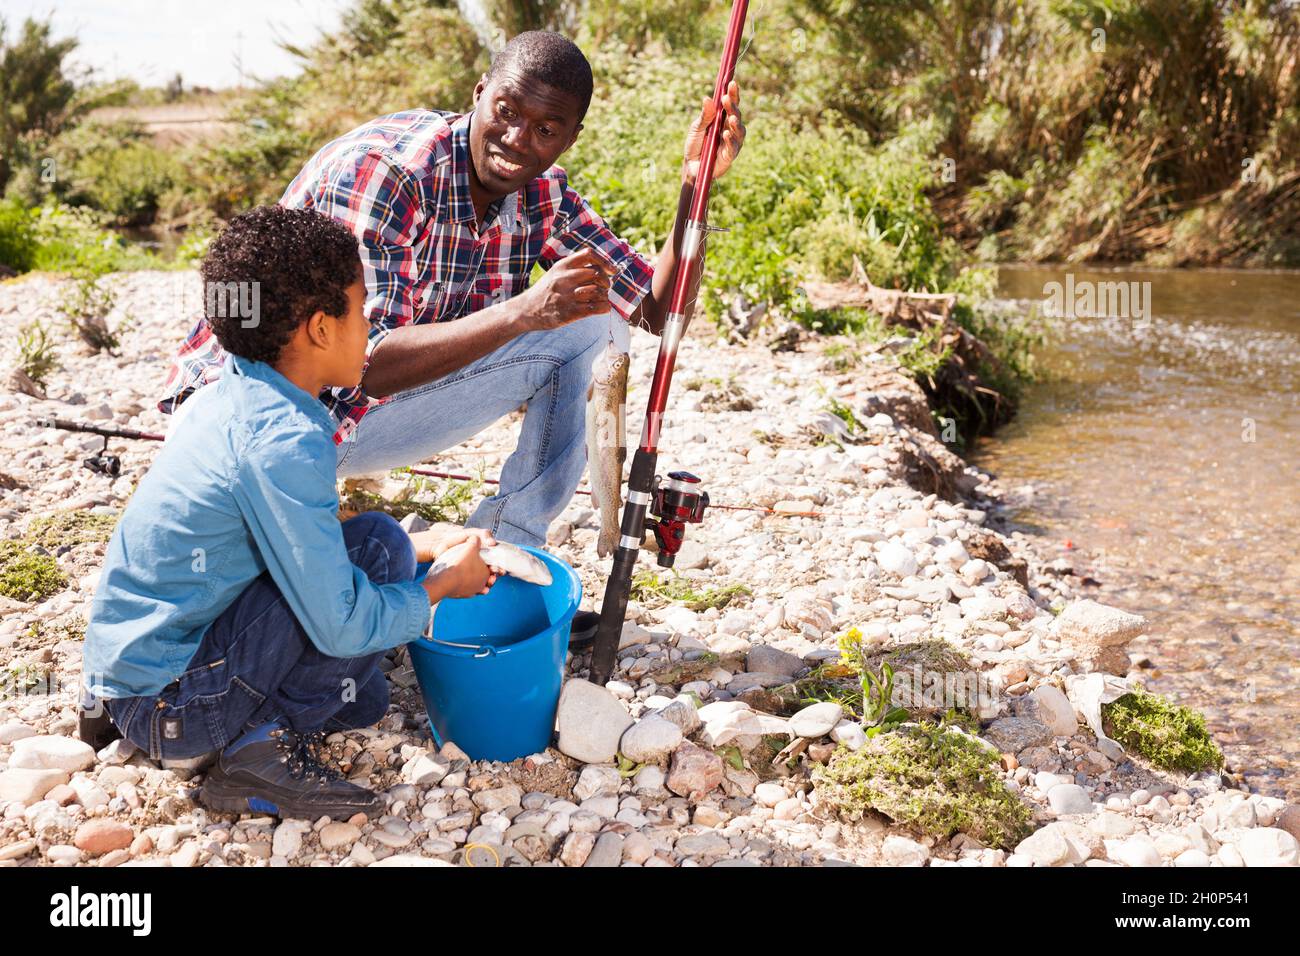 Boy and his father holding fish on hook Stock Photo